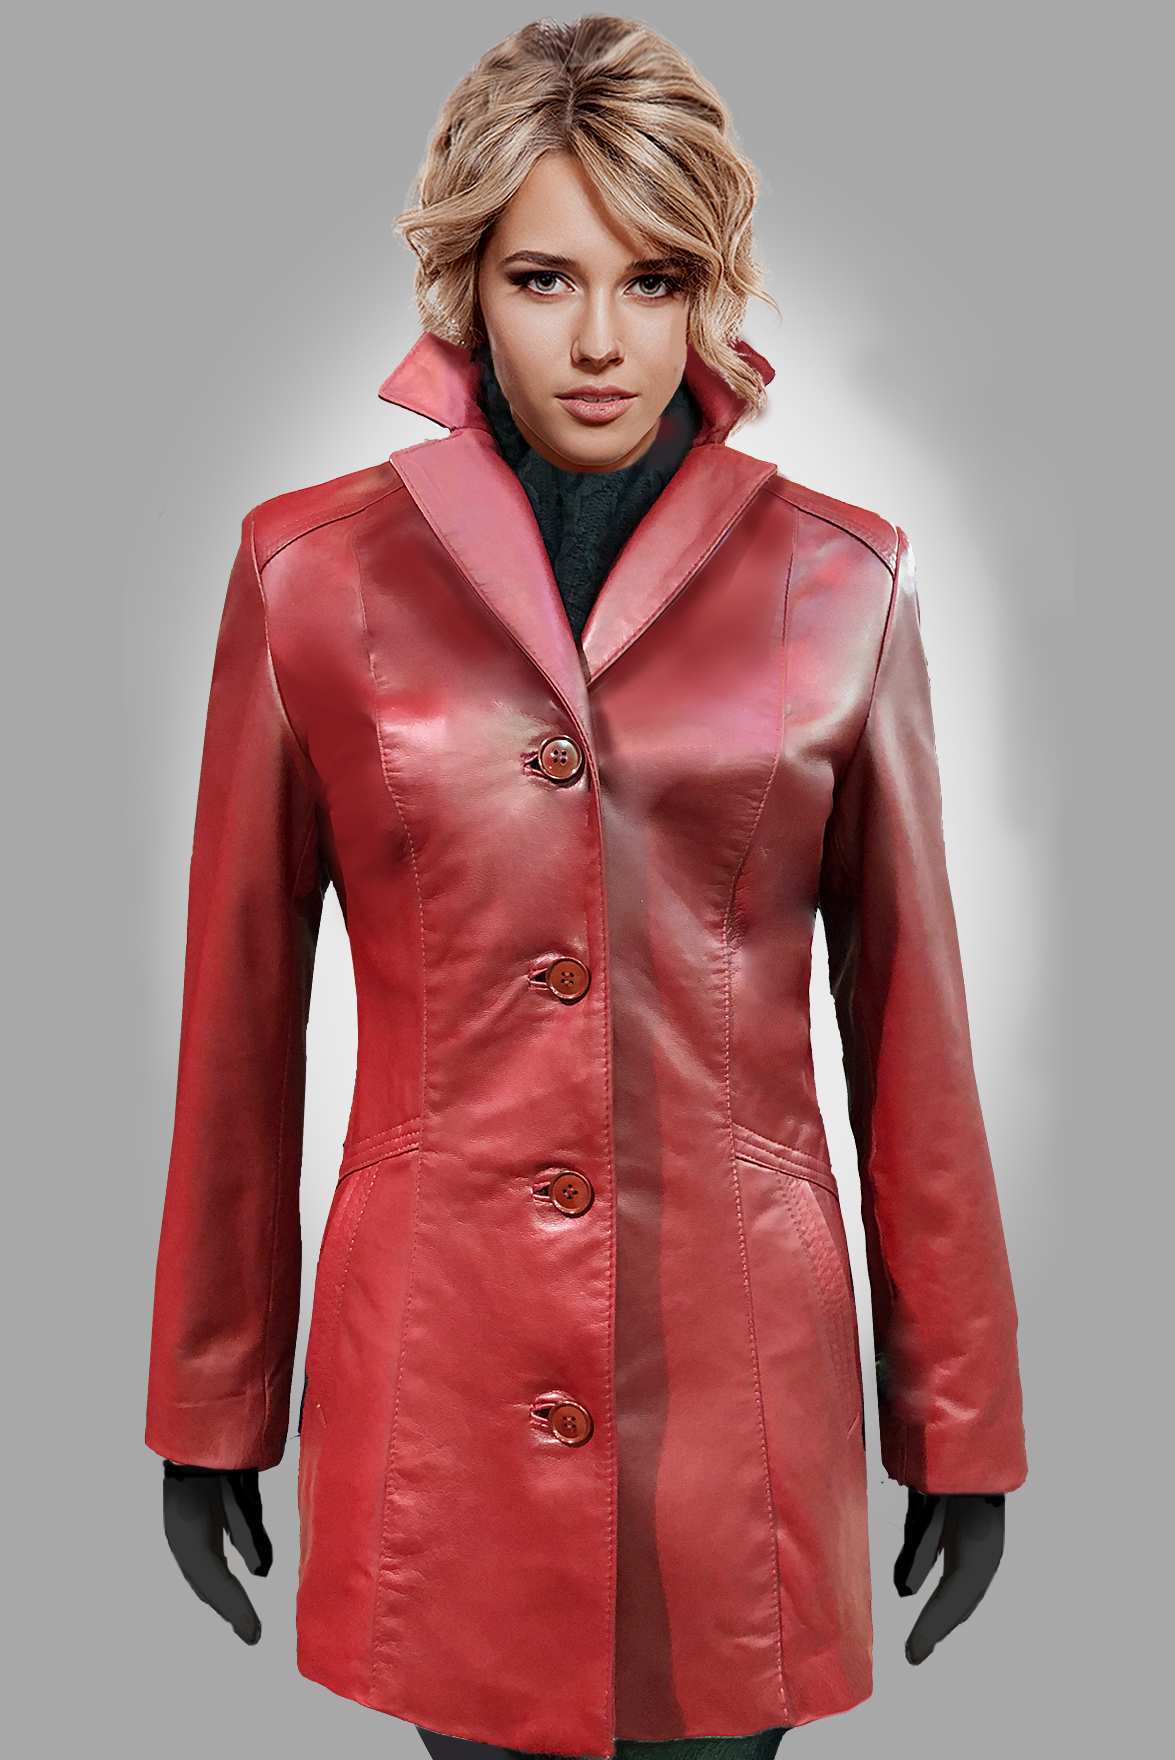  Red Leather Blazer Long Jackets for Women Womens